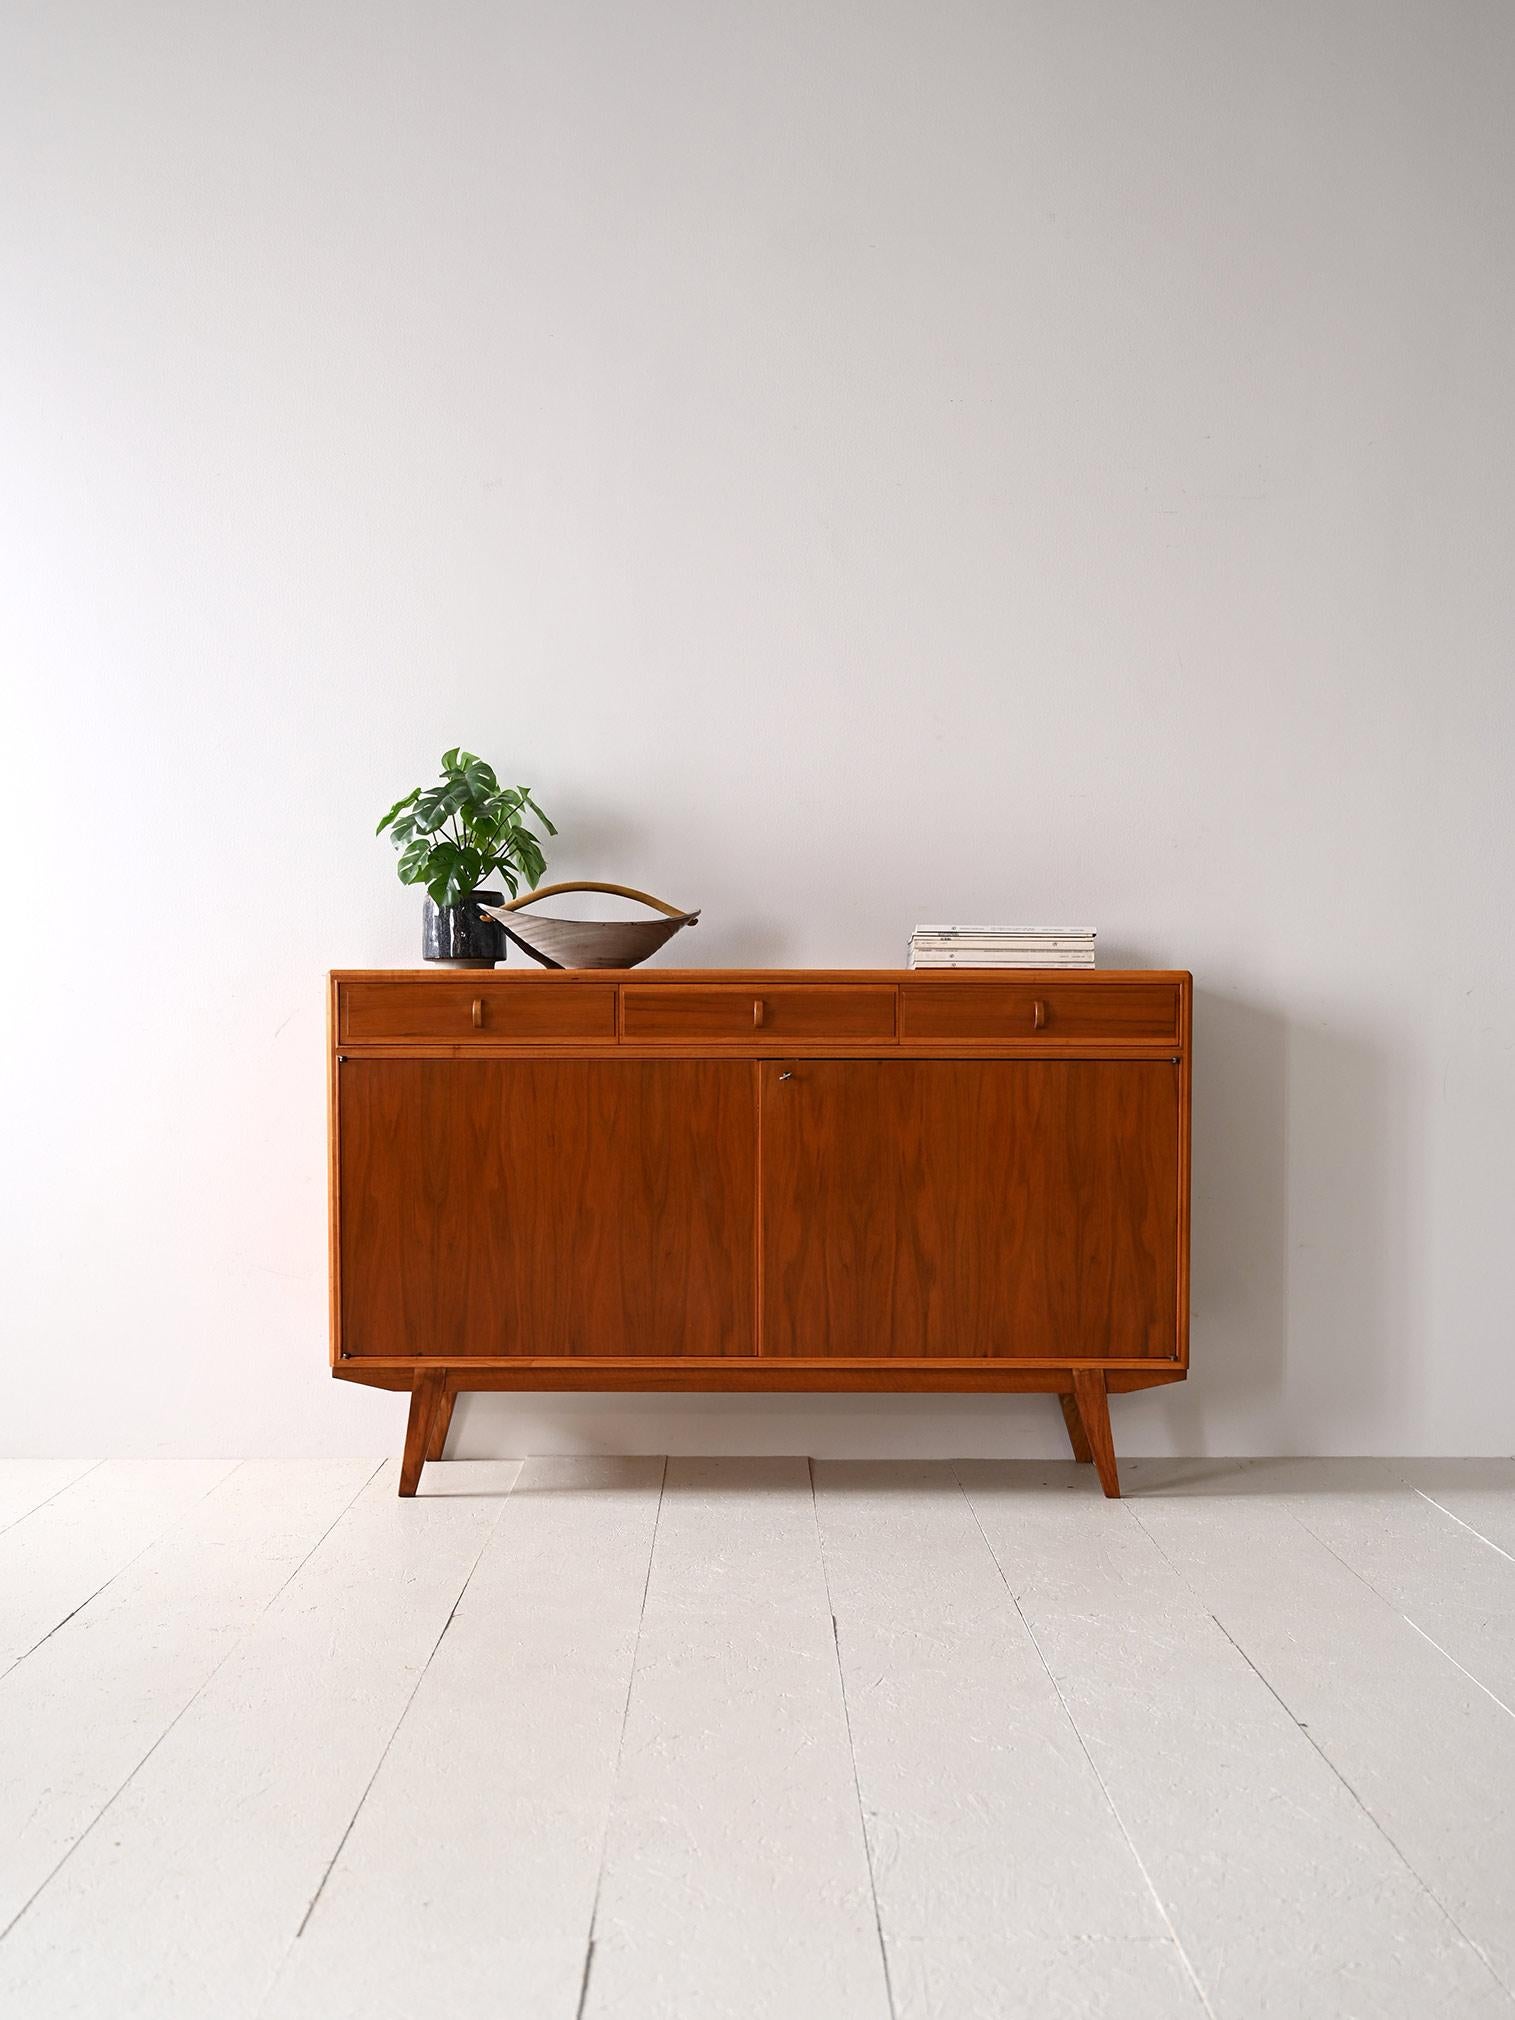 Scandinavian teak sideboard from the 1960s.

A Swedish design piece with a compact and modern shape, consisting of a storage compartment closed by hinged doors above which are three drawers with a curved wooden handle.
Inside the cabinet are two